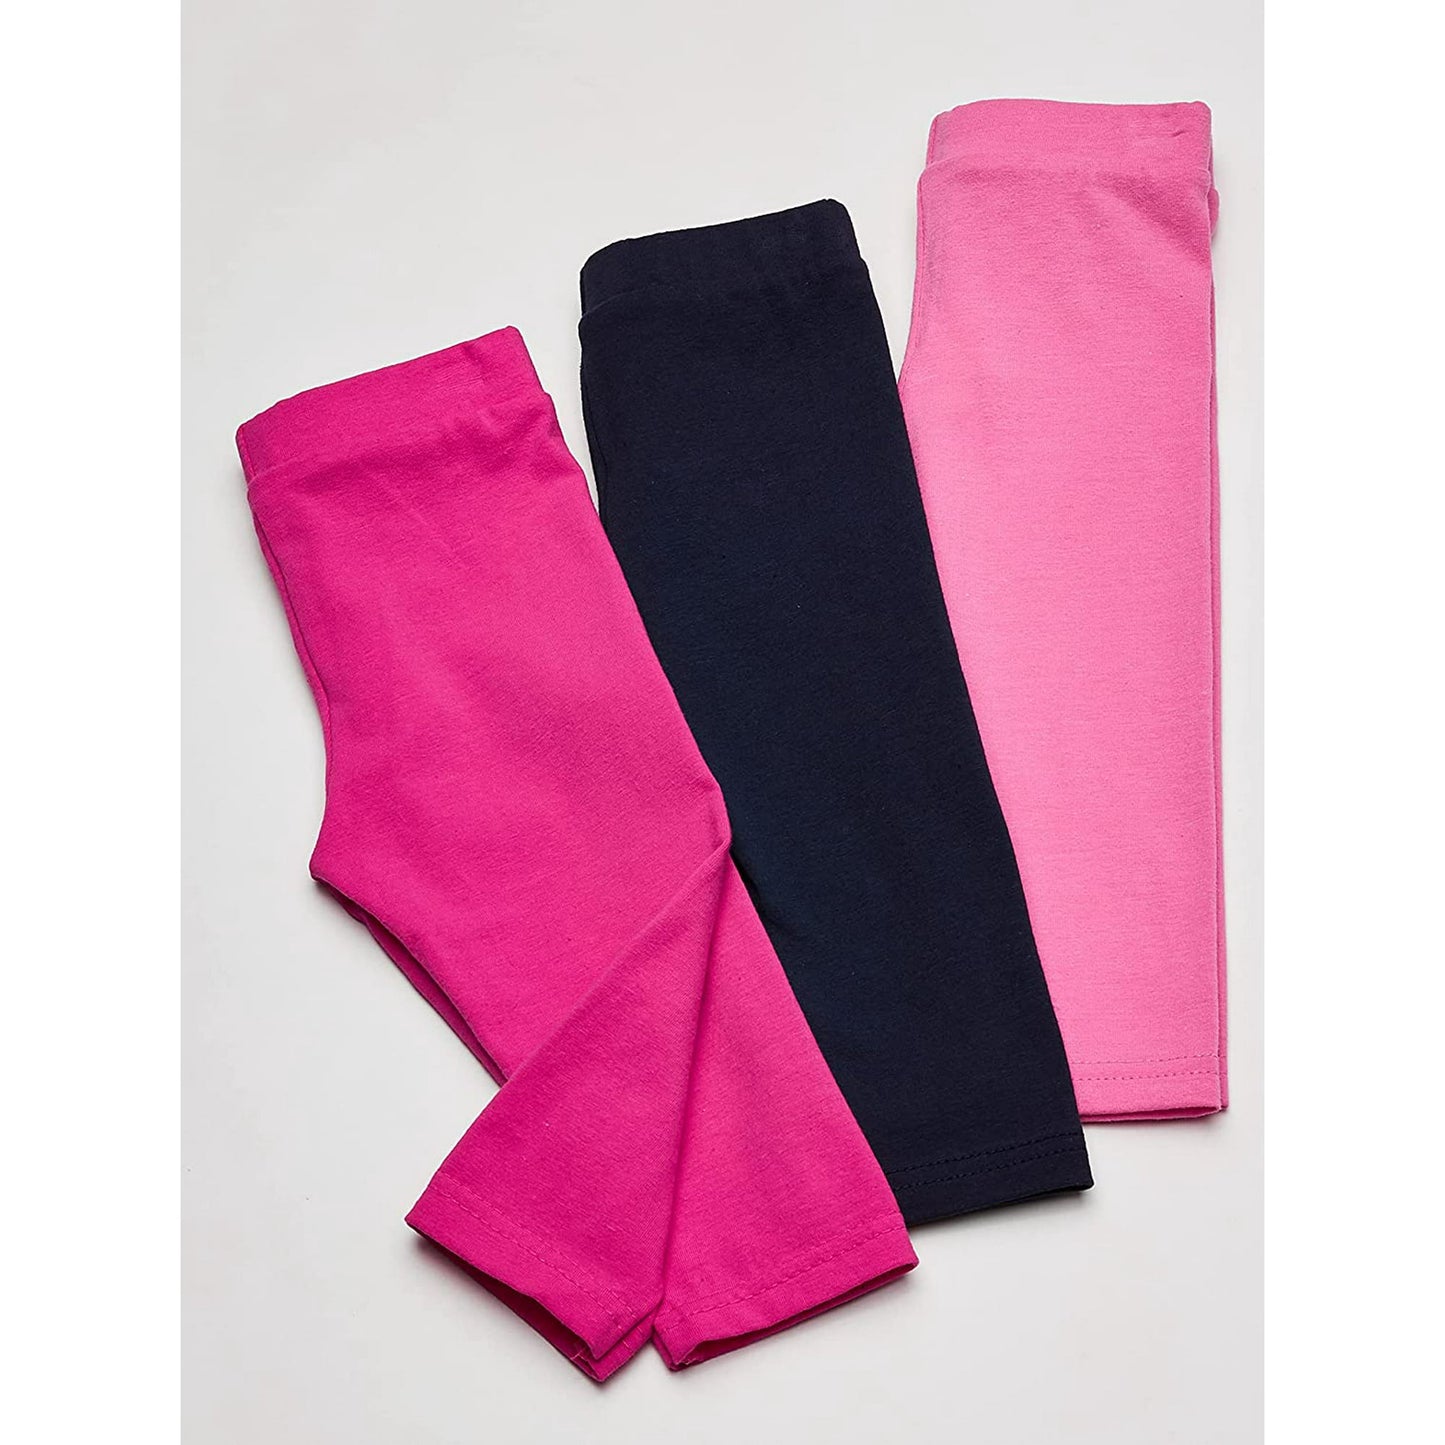 Luvable Friends Baby and Toddler Girl Cotton Leggings 3pk, Dark Pink Navy,